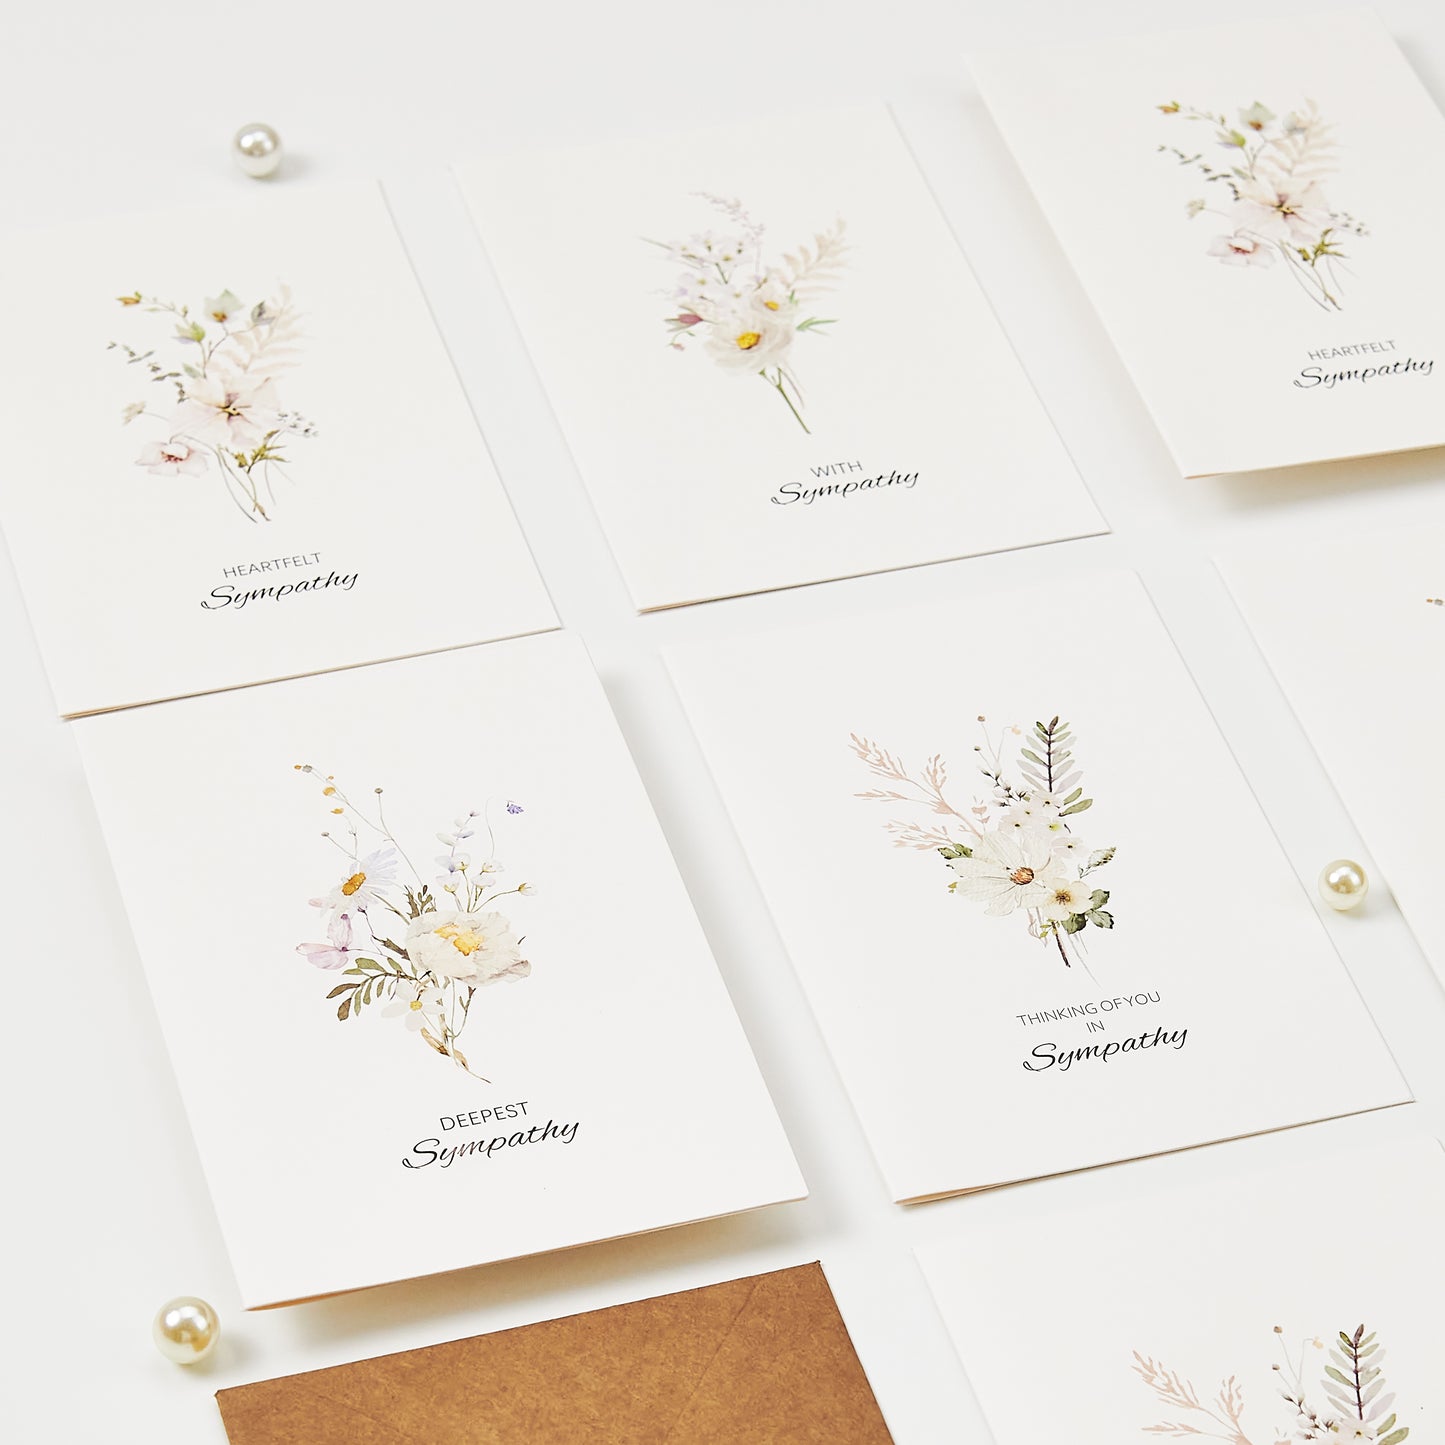 Crisky 4 Pack Watercolor White WildFlower Sympathy Cards with Envelopes Sealed 4 Assortment Condolence/Bereavement Cards